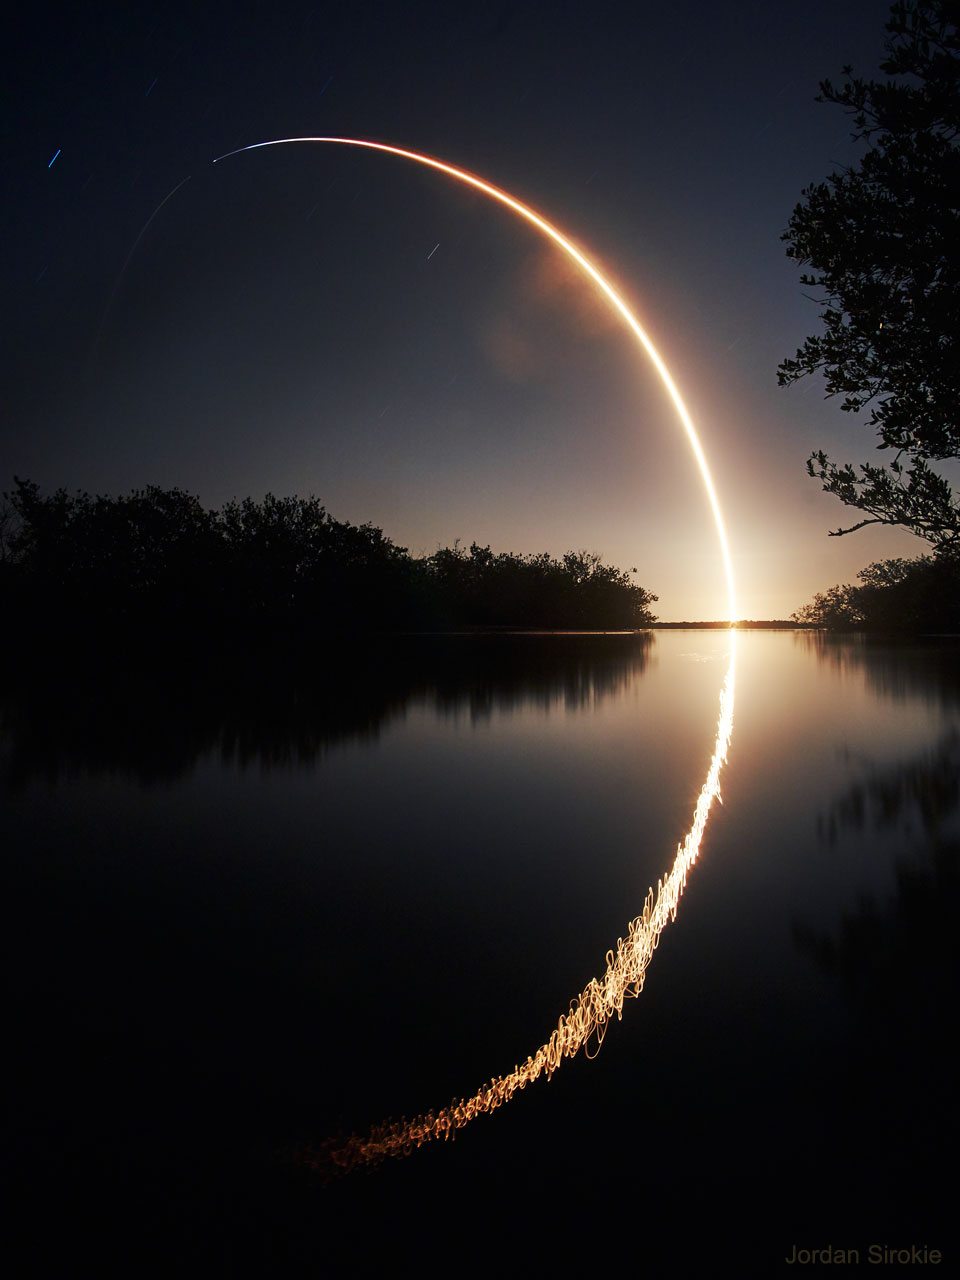 The featured image shows a long exposure image of  the launch of NASA's IXPE observatory to low Earth orbit. The launch was on a Falcon 9 Rocket by SpaceX. Please see the explanation for more detailed information.